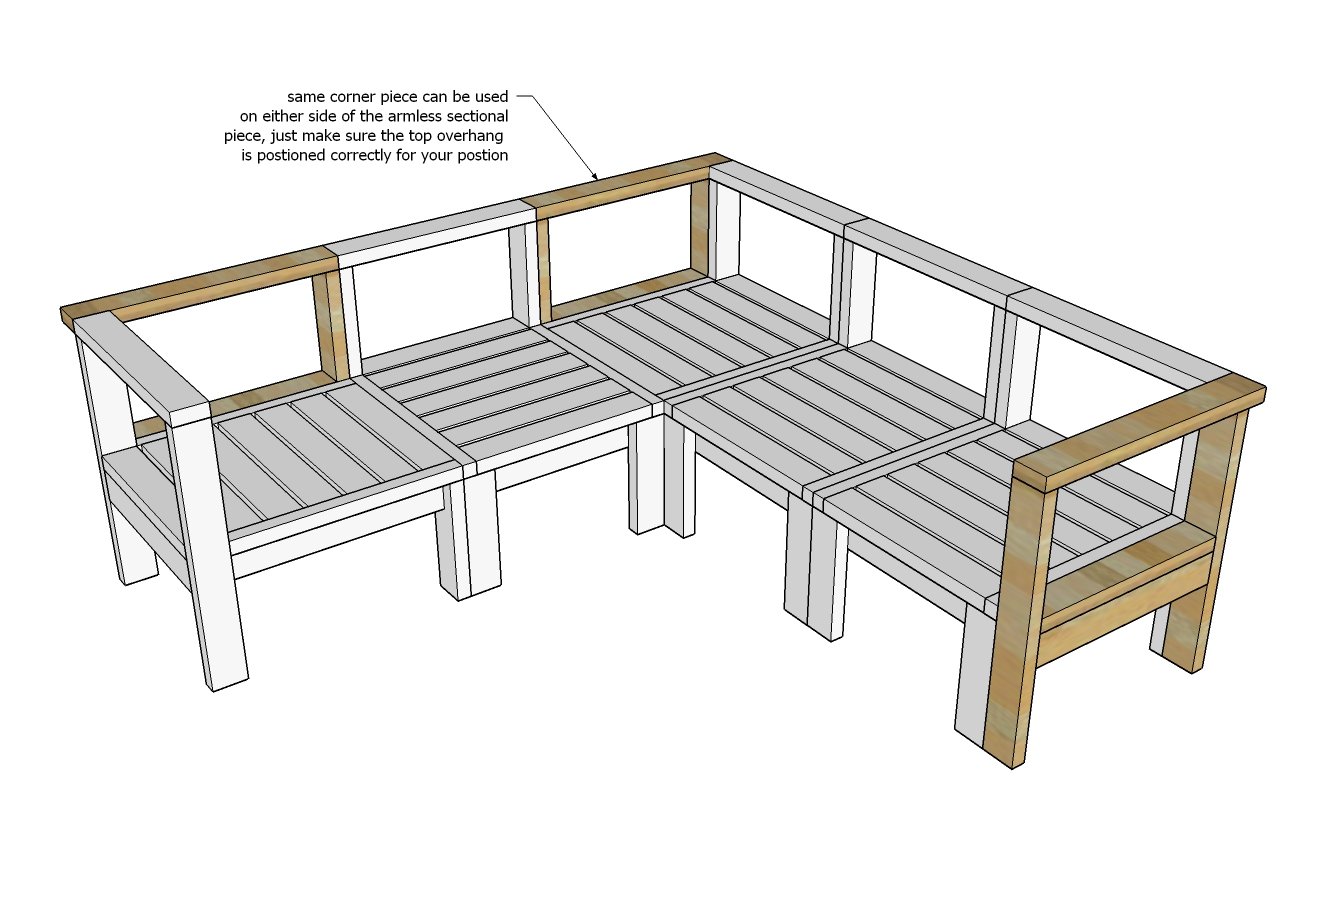 diagram of outdoor sectional piece with corner modification